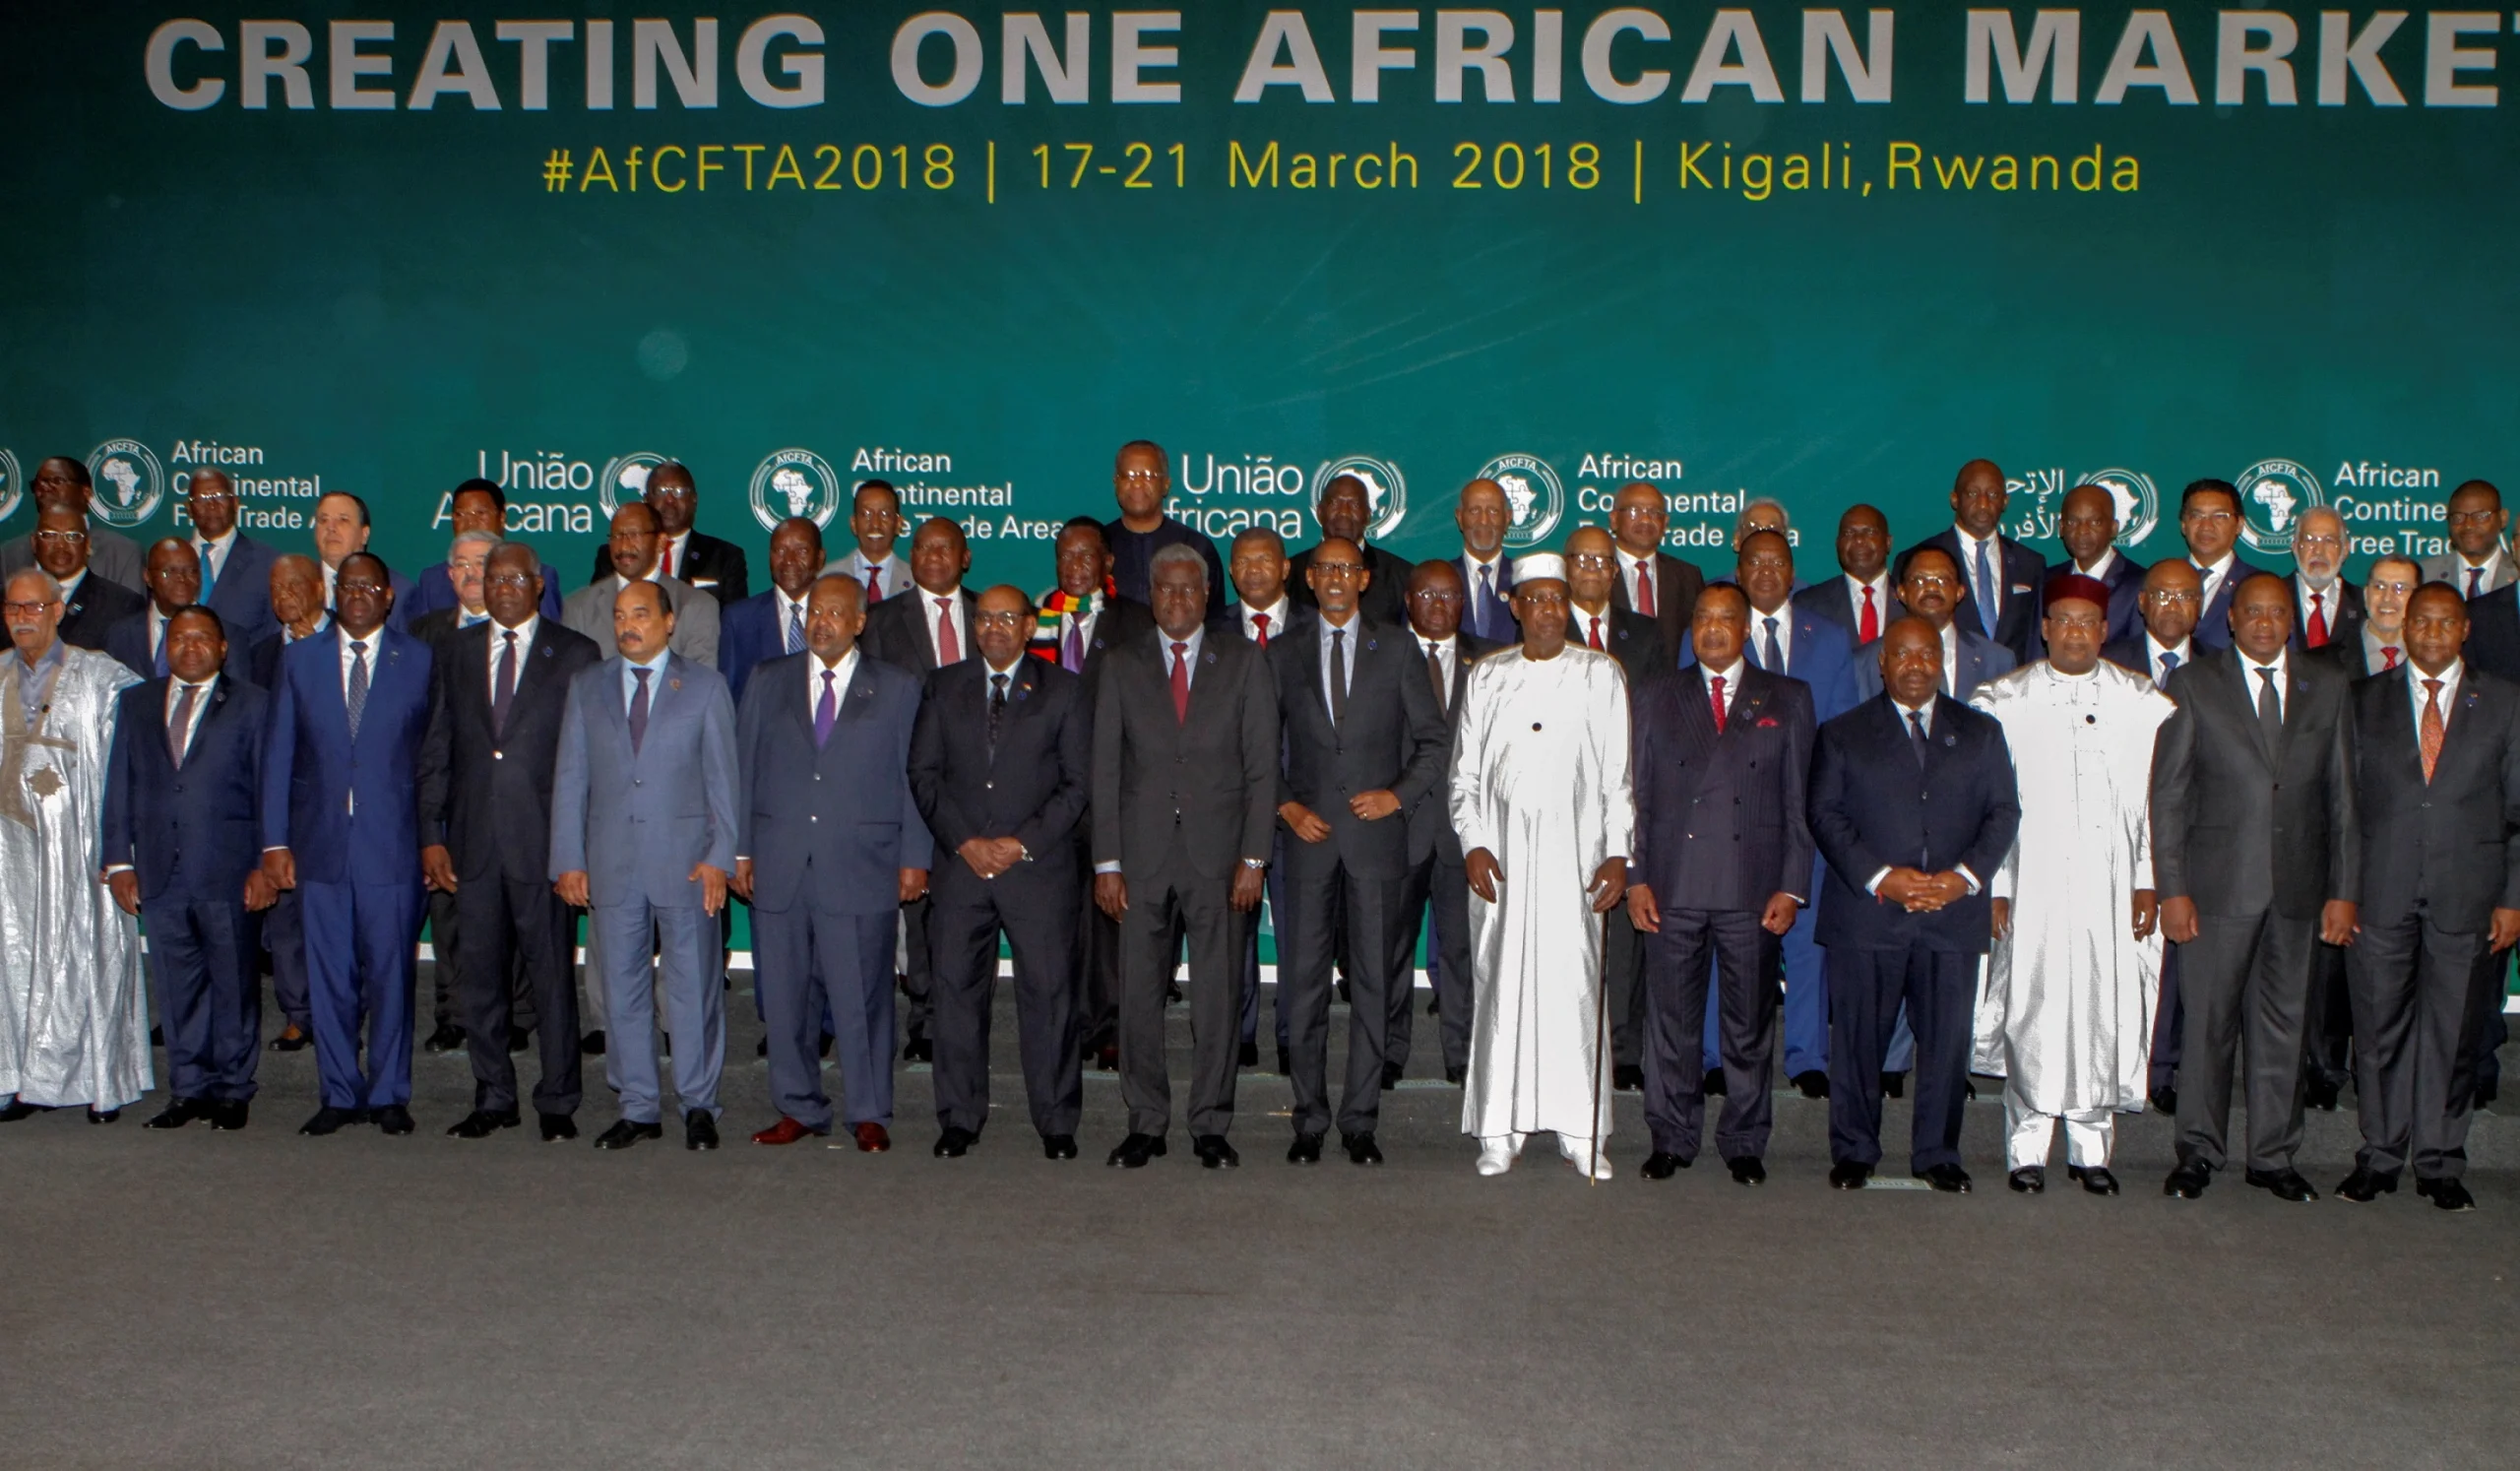 Nations launched the AfCFTA 